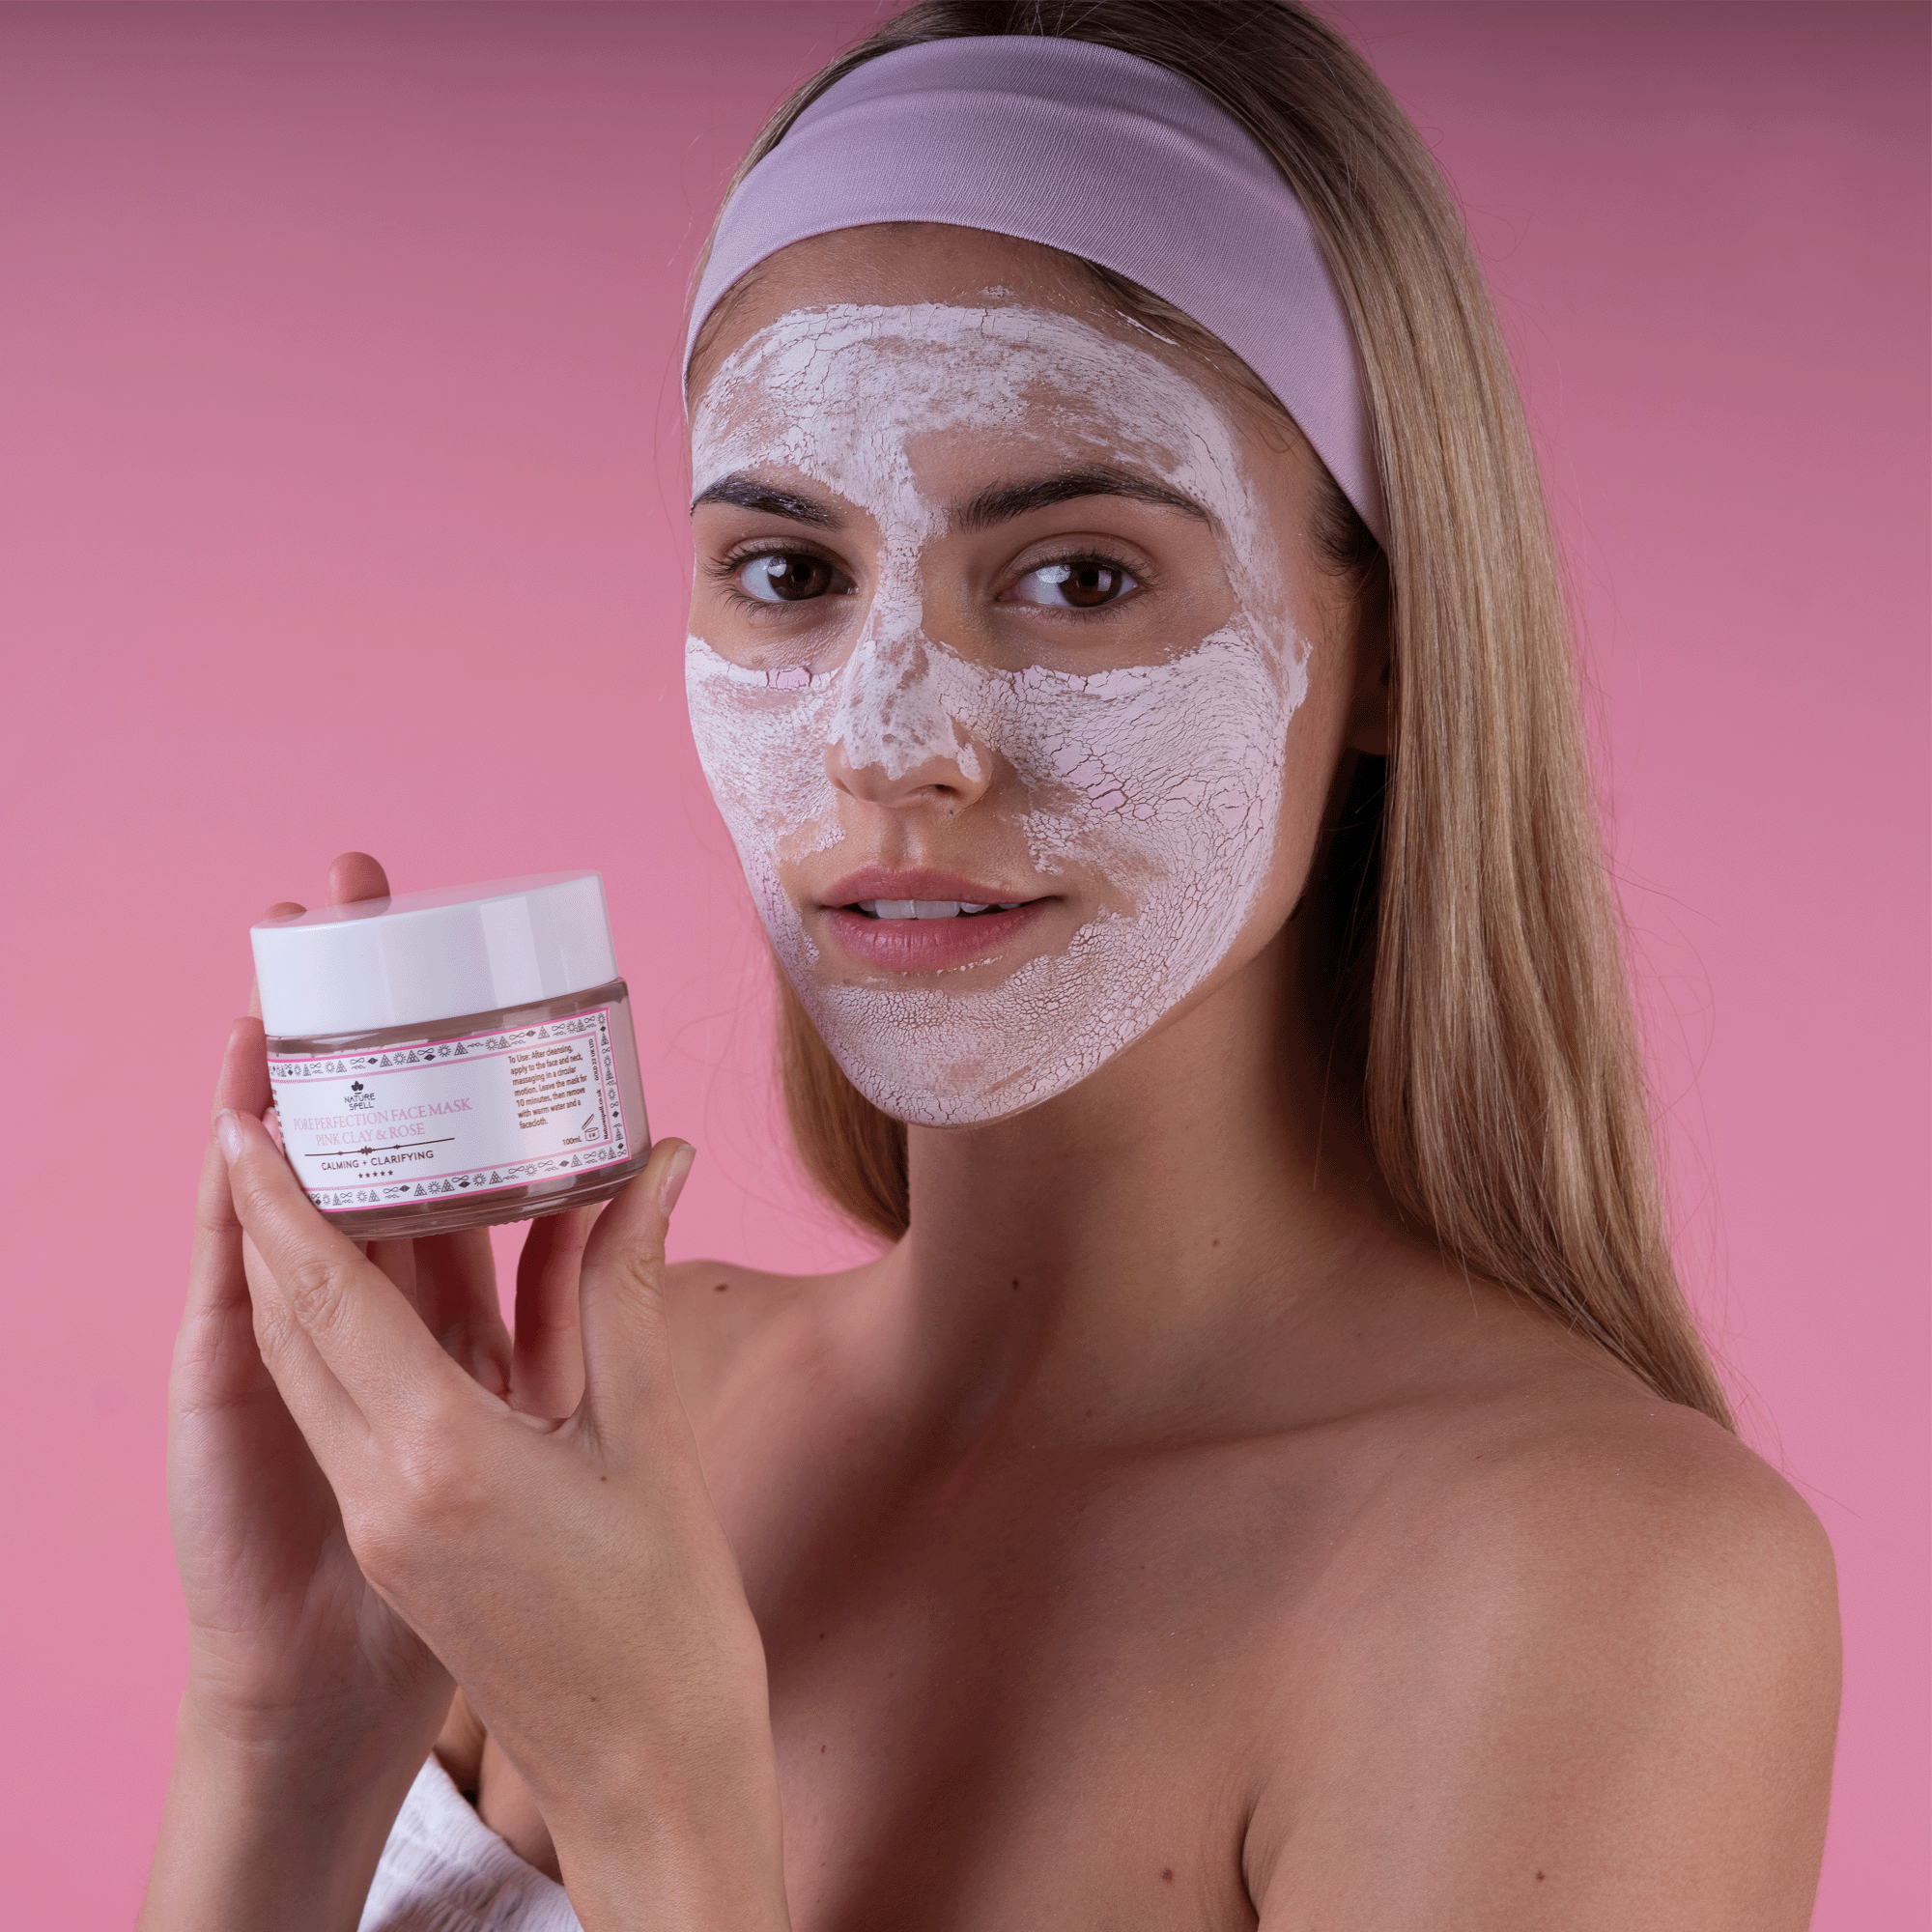 Australian Pink Clay & Rose Pore Perfection Face Mask